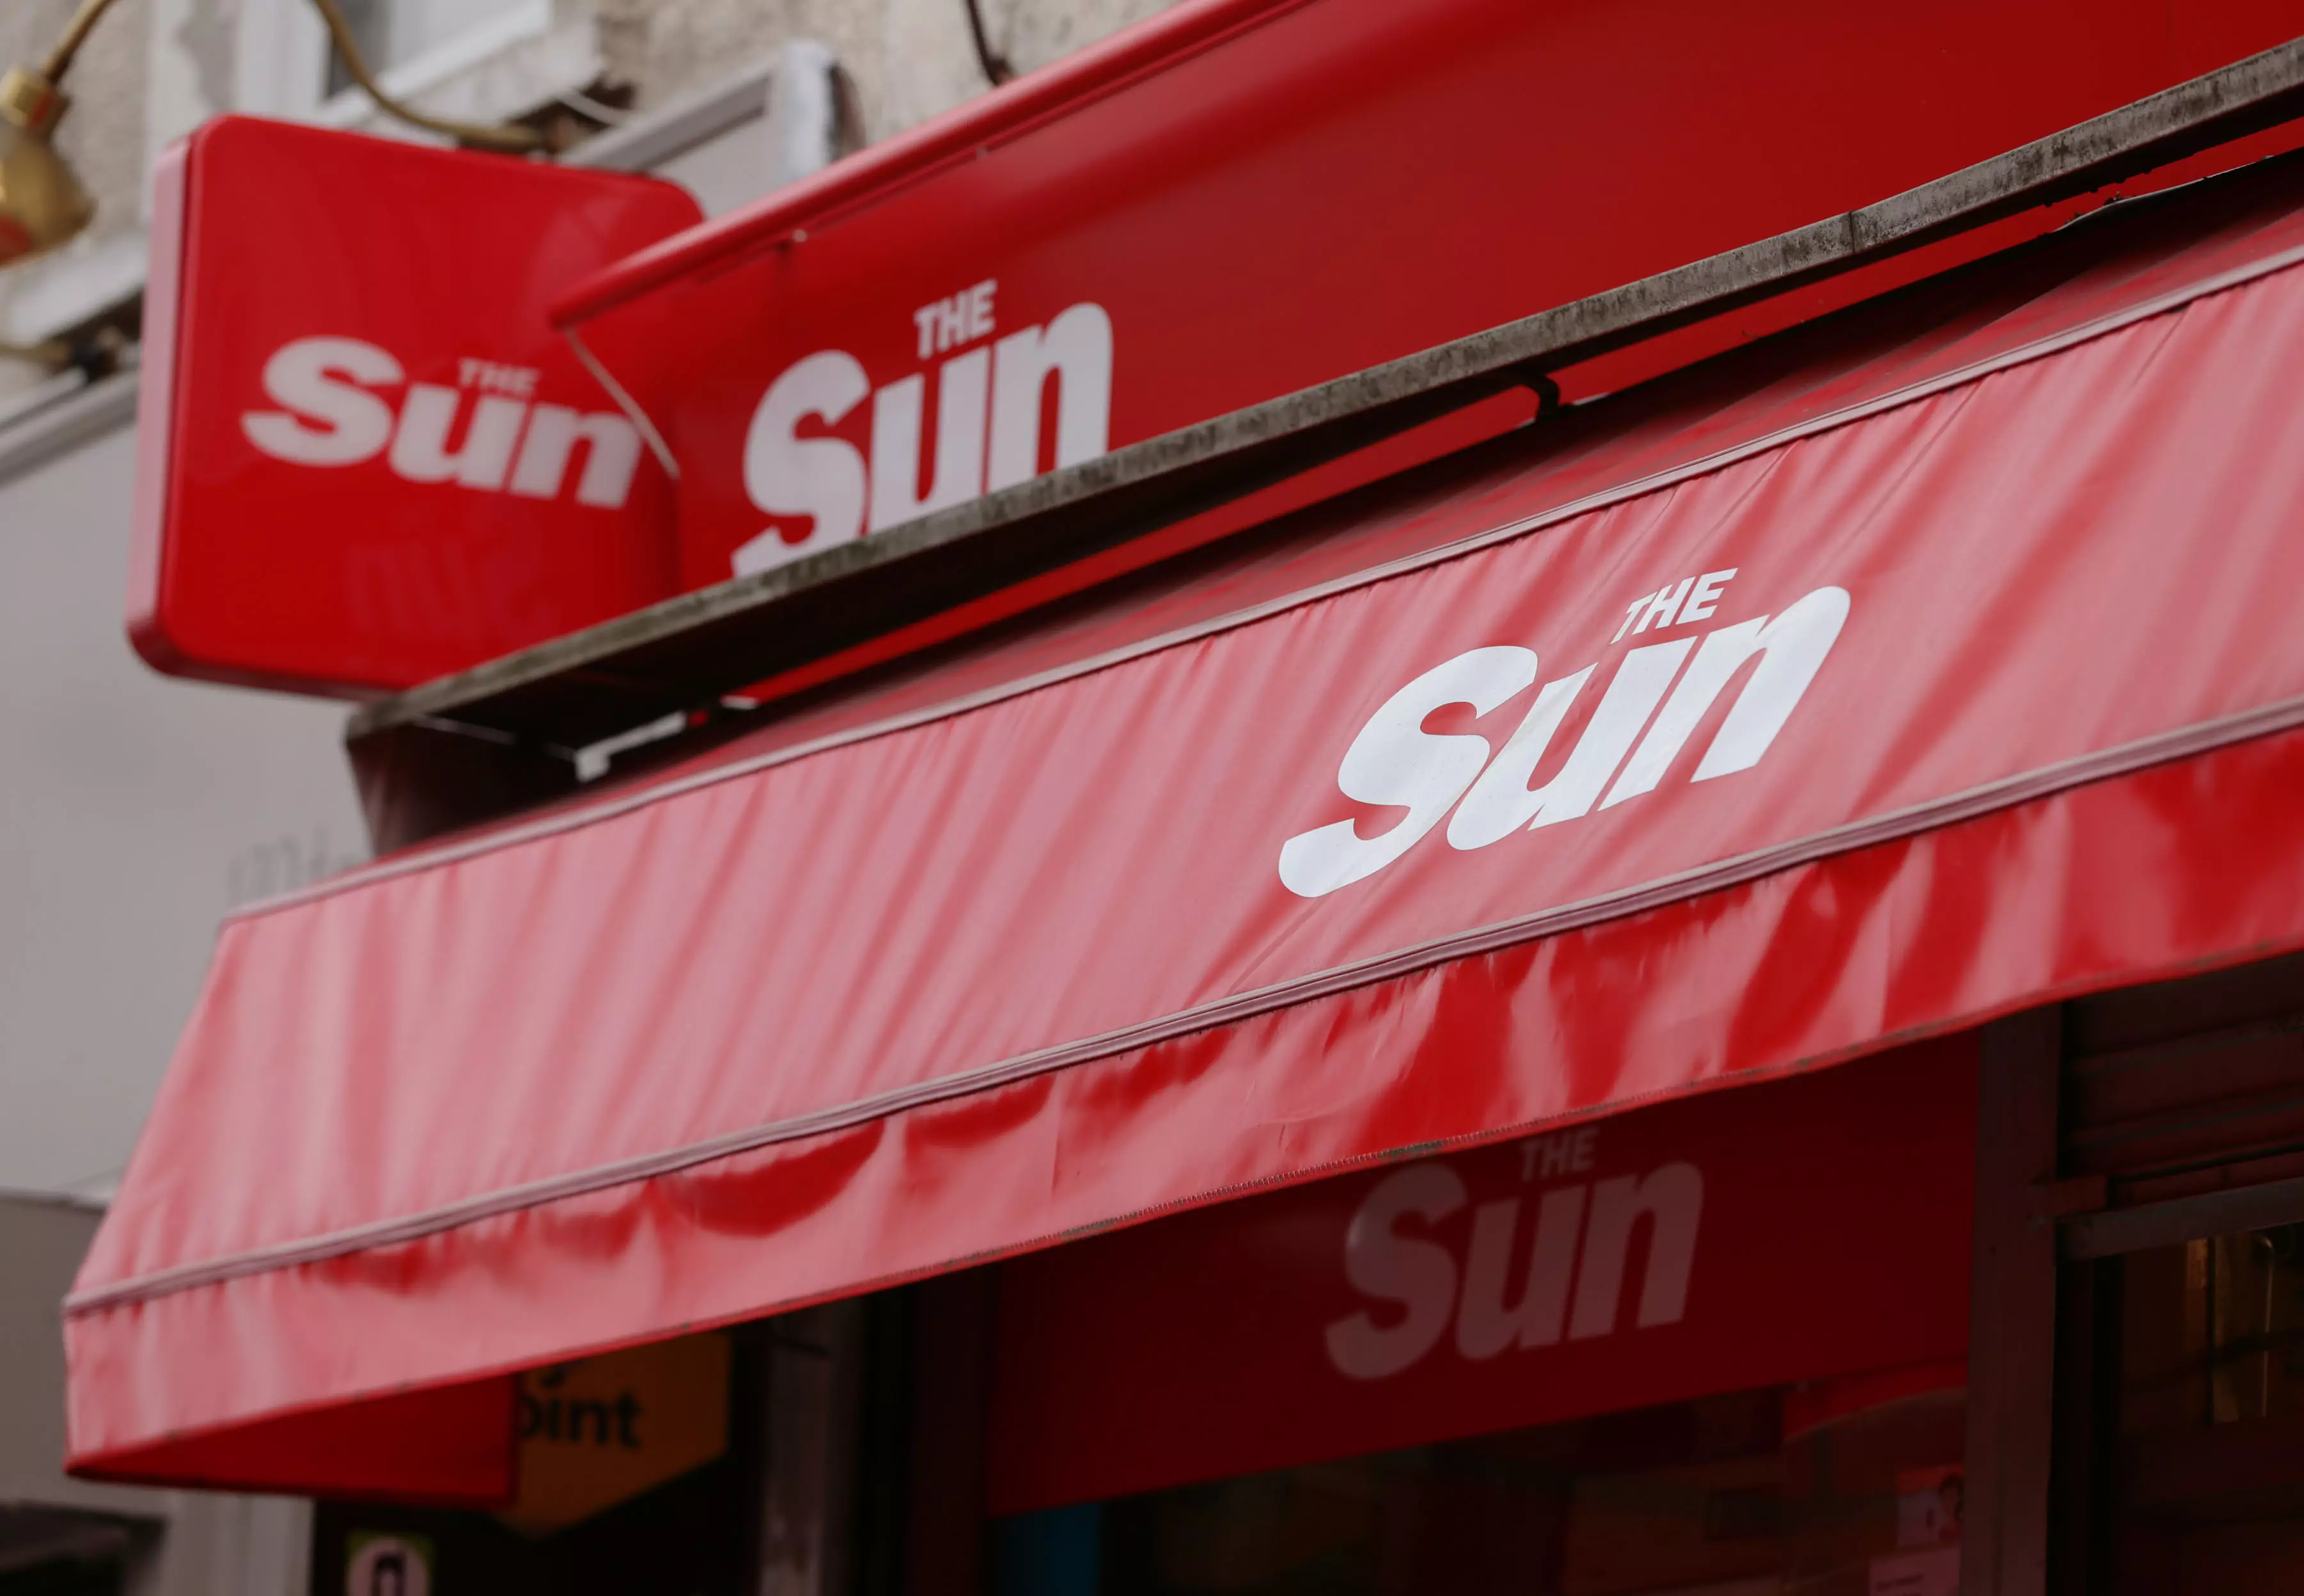 The Sun Asks Readers For 'Breast Cleavage Snaps', Gets Ruthlessly Trolled